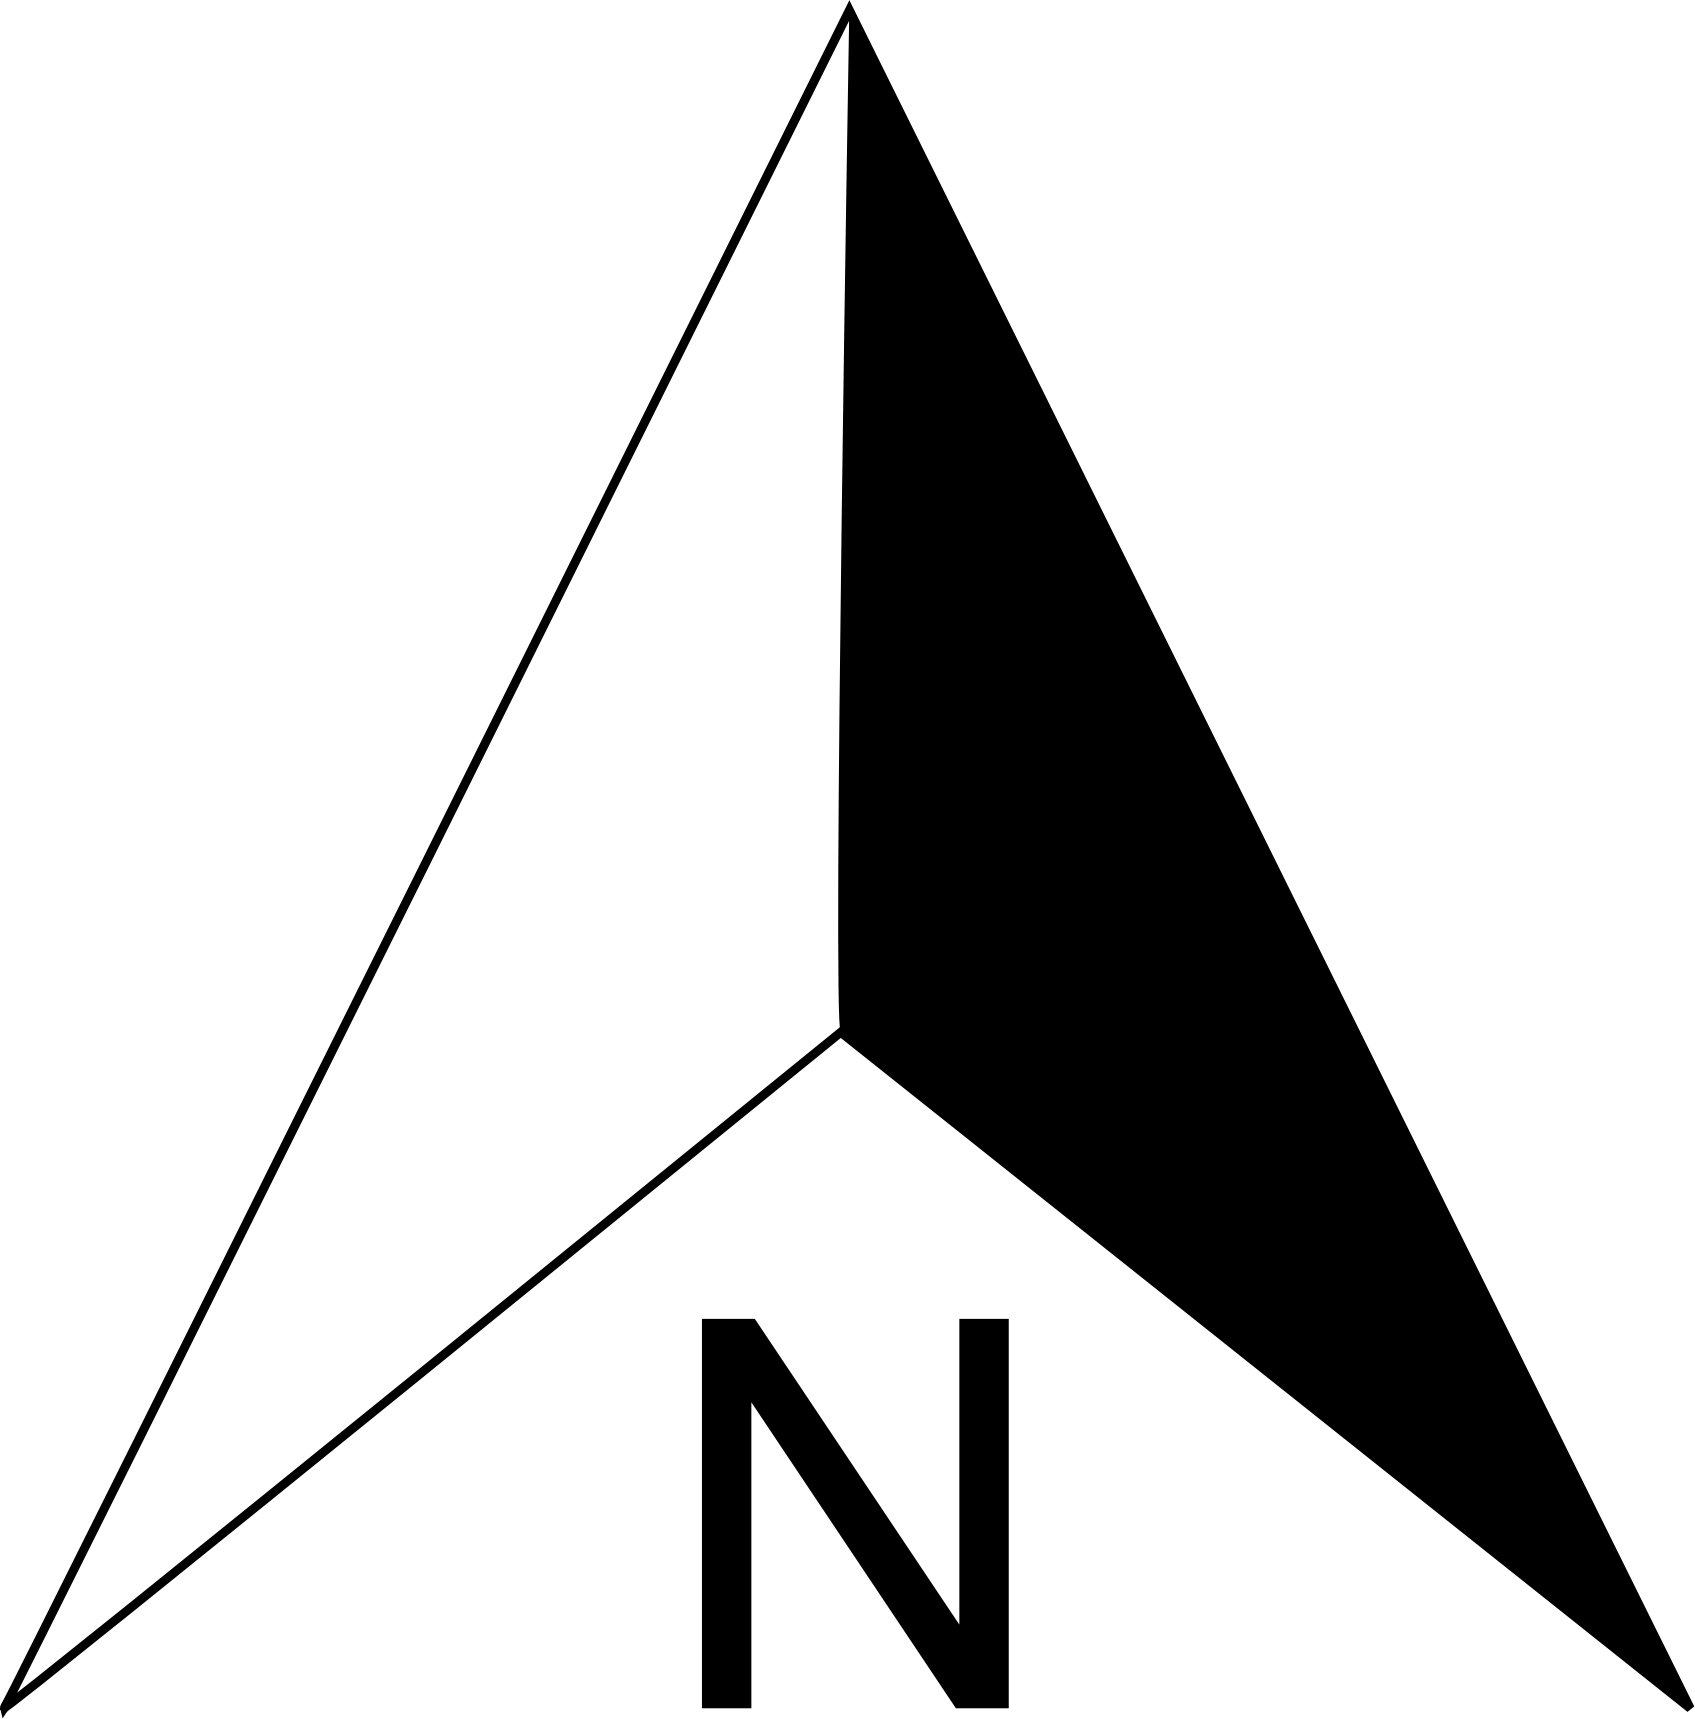 0 Result Images of North Arrow Symbol Png - PNG Image Collection